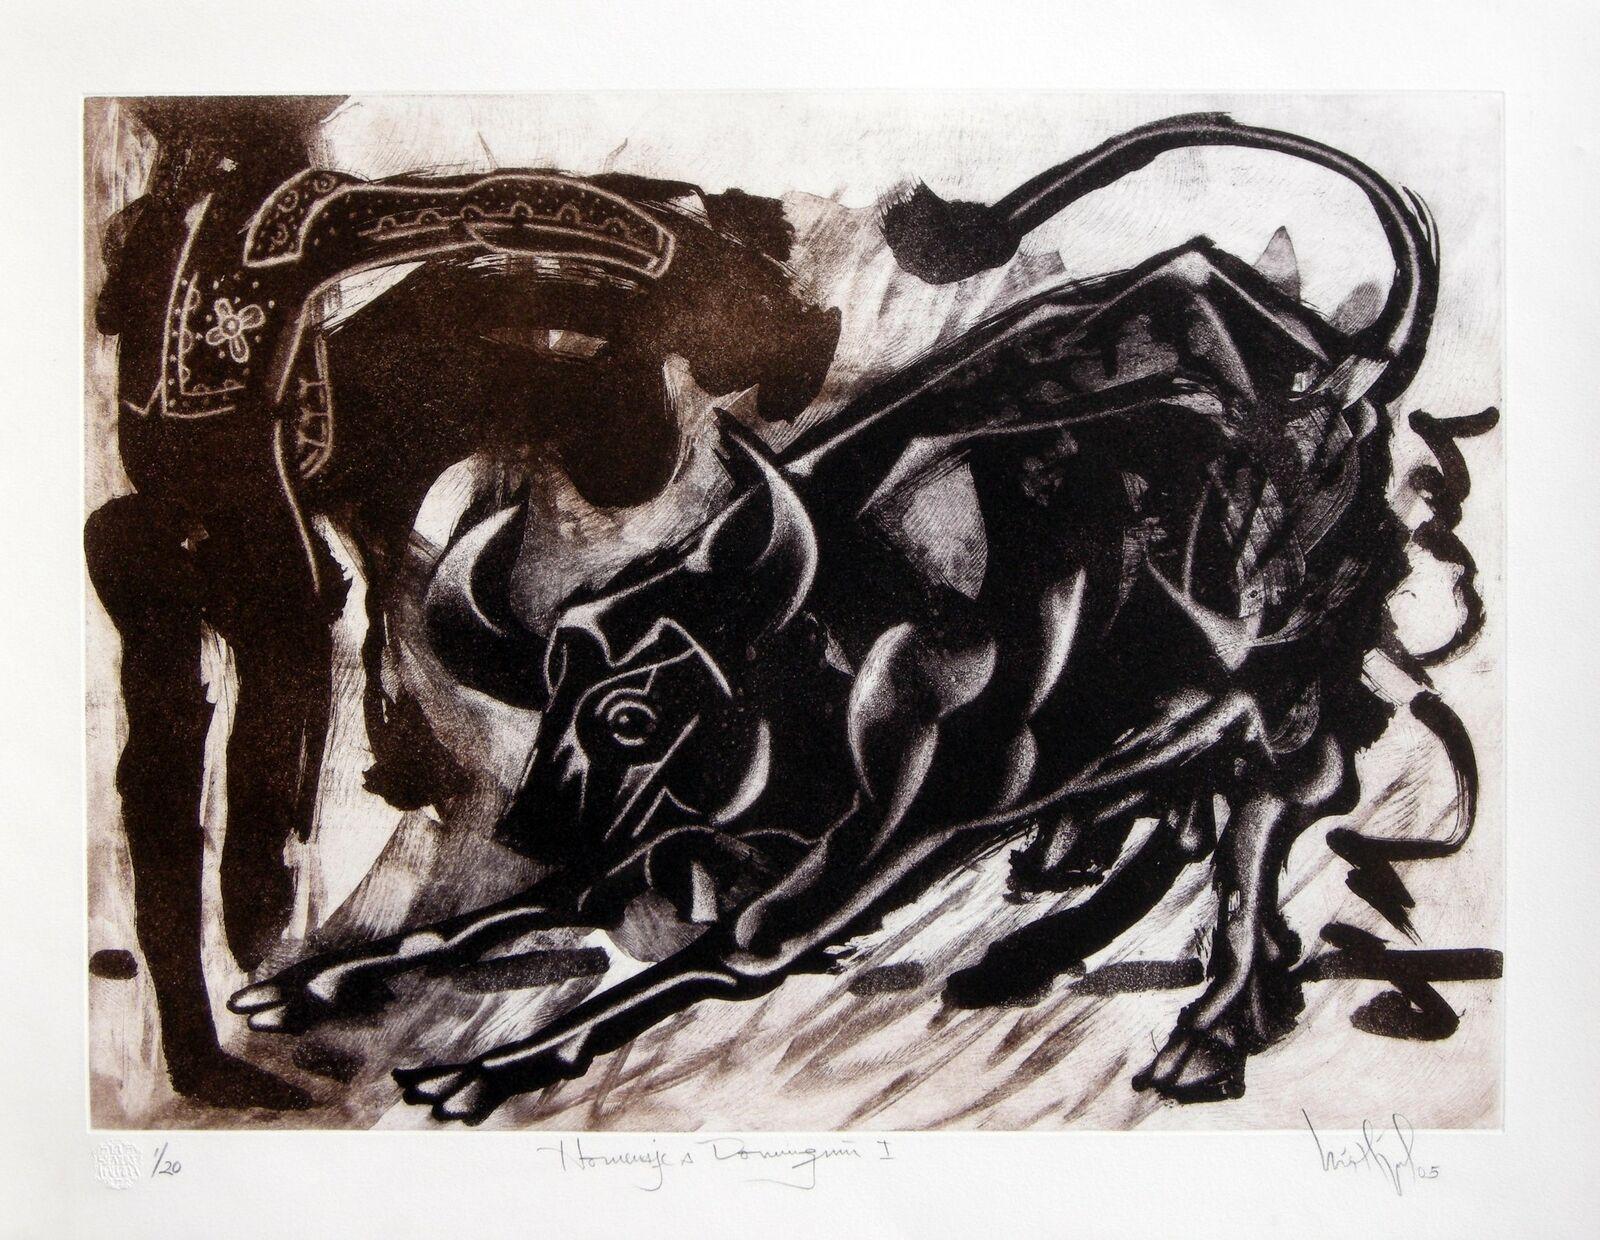 Cuban signed limited edition original art print etching, aquatint, sugarlift 129 - Print by Luis Miguel Valdes 